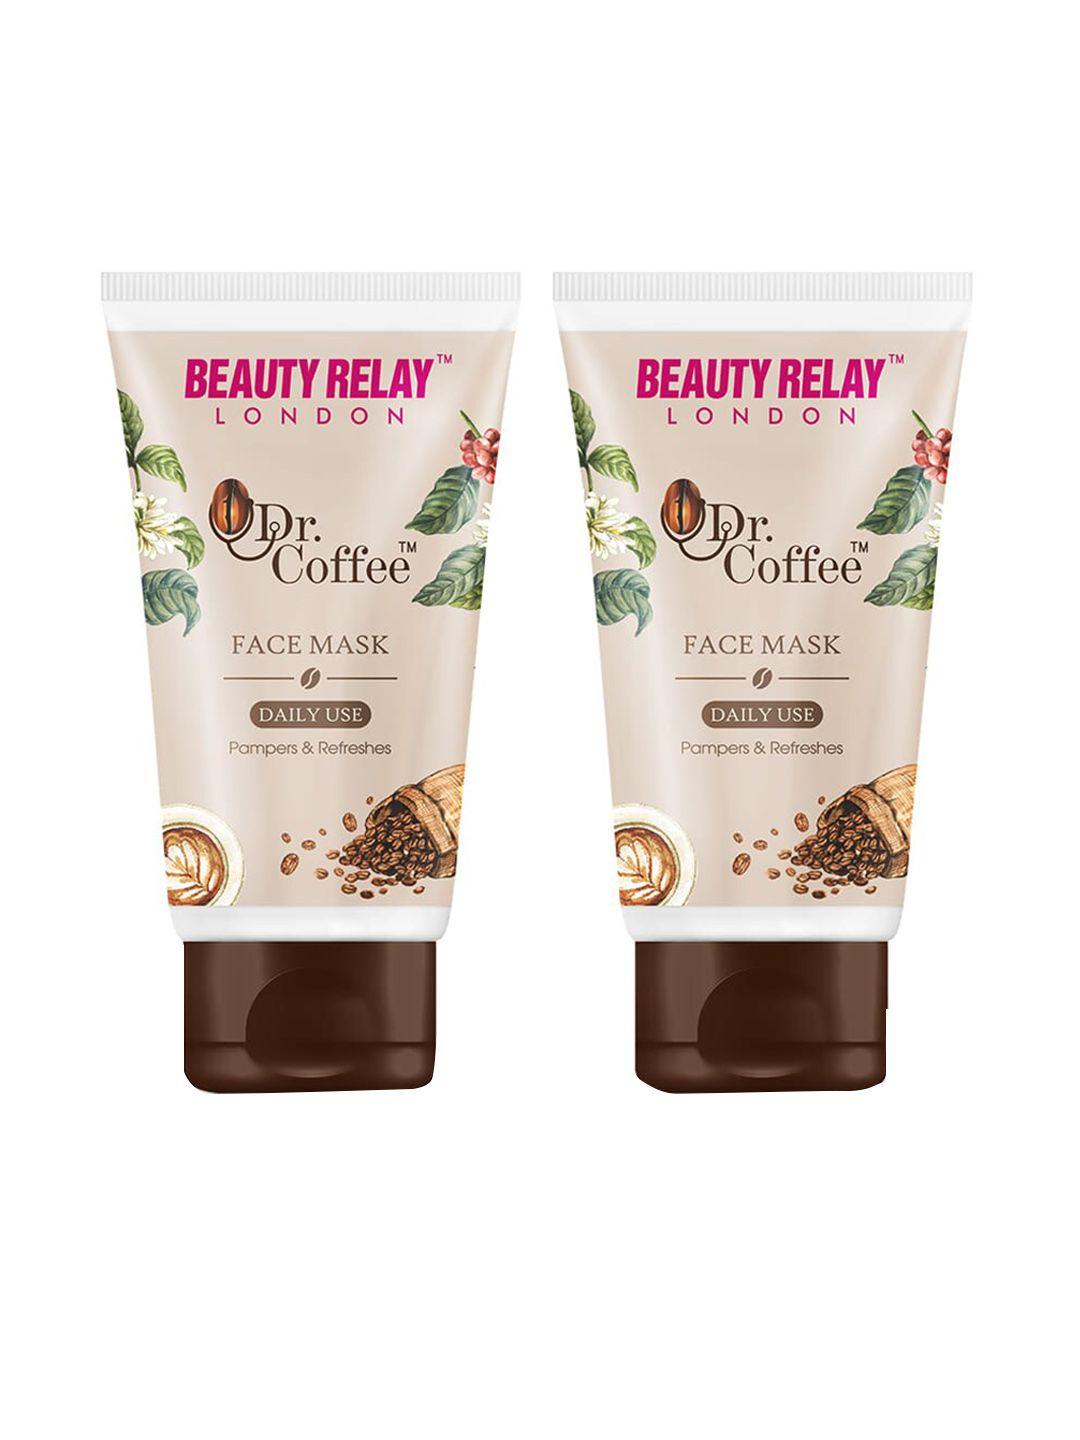 beautyrelay london dr. coffee face masks 200g - buy 1 get 1 free